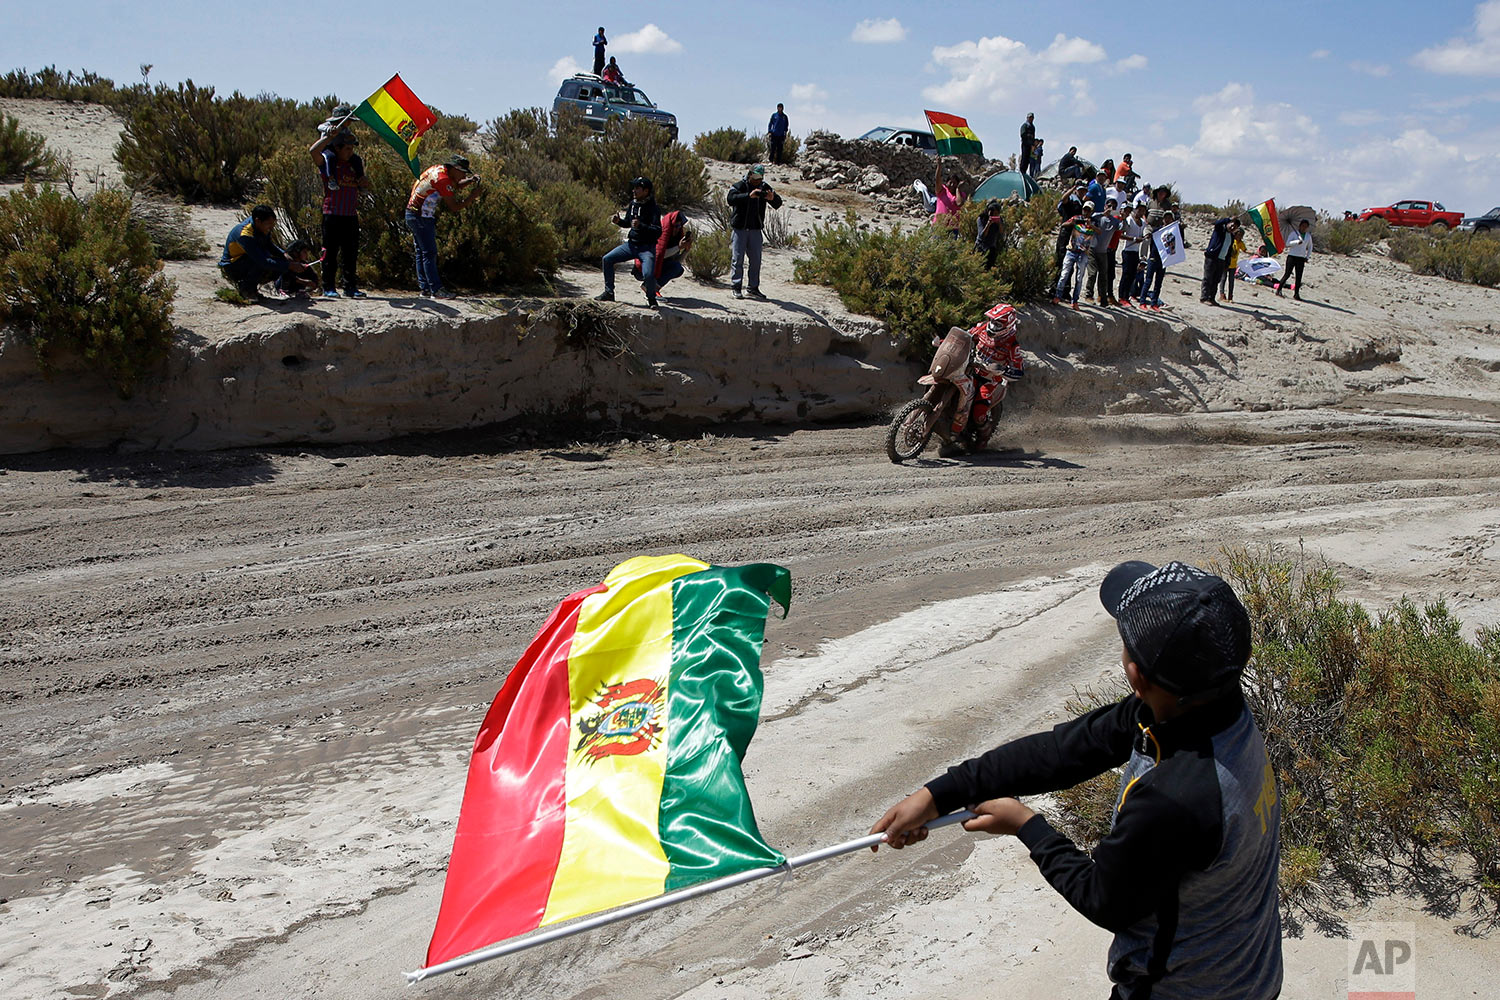  In this Saturday, Jan. 13, 2018 photo, spectators wave Bolivian flags as France's Gasgas motorbike rider Johnny Aubert races during stage 7 of the Dakar Rally between La Paz and Uyuni, Bolivia. (AP Photo/Ricardo Mazalan) |&nbsp; See these photos on 